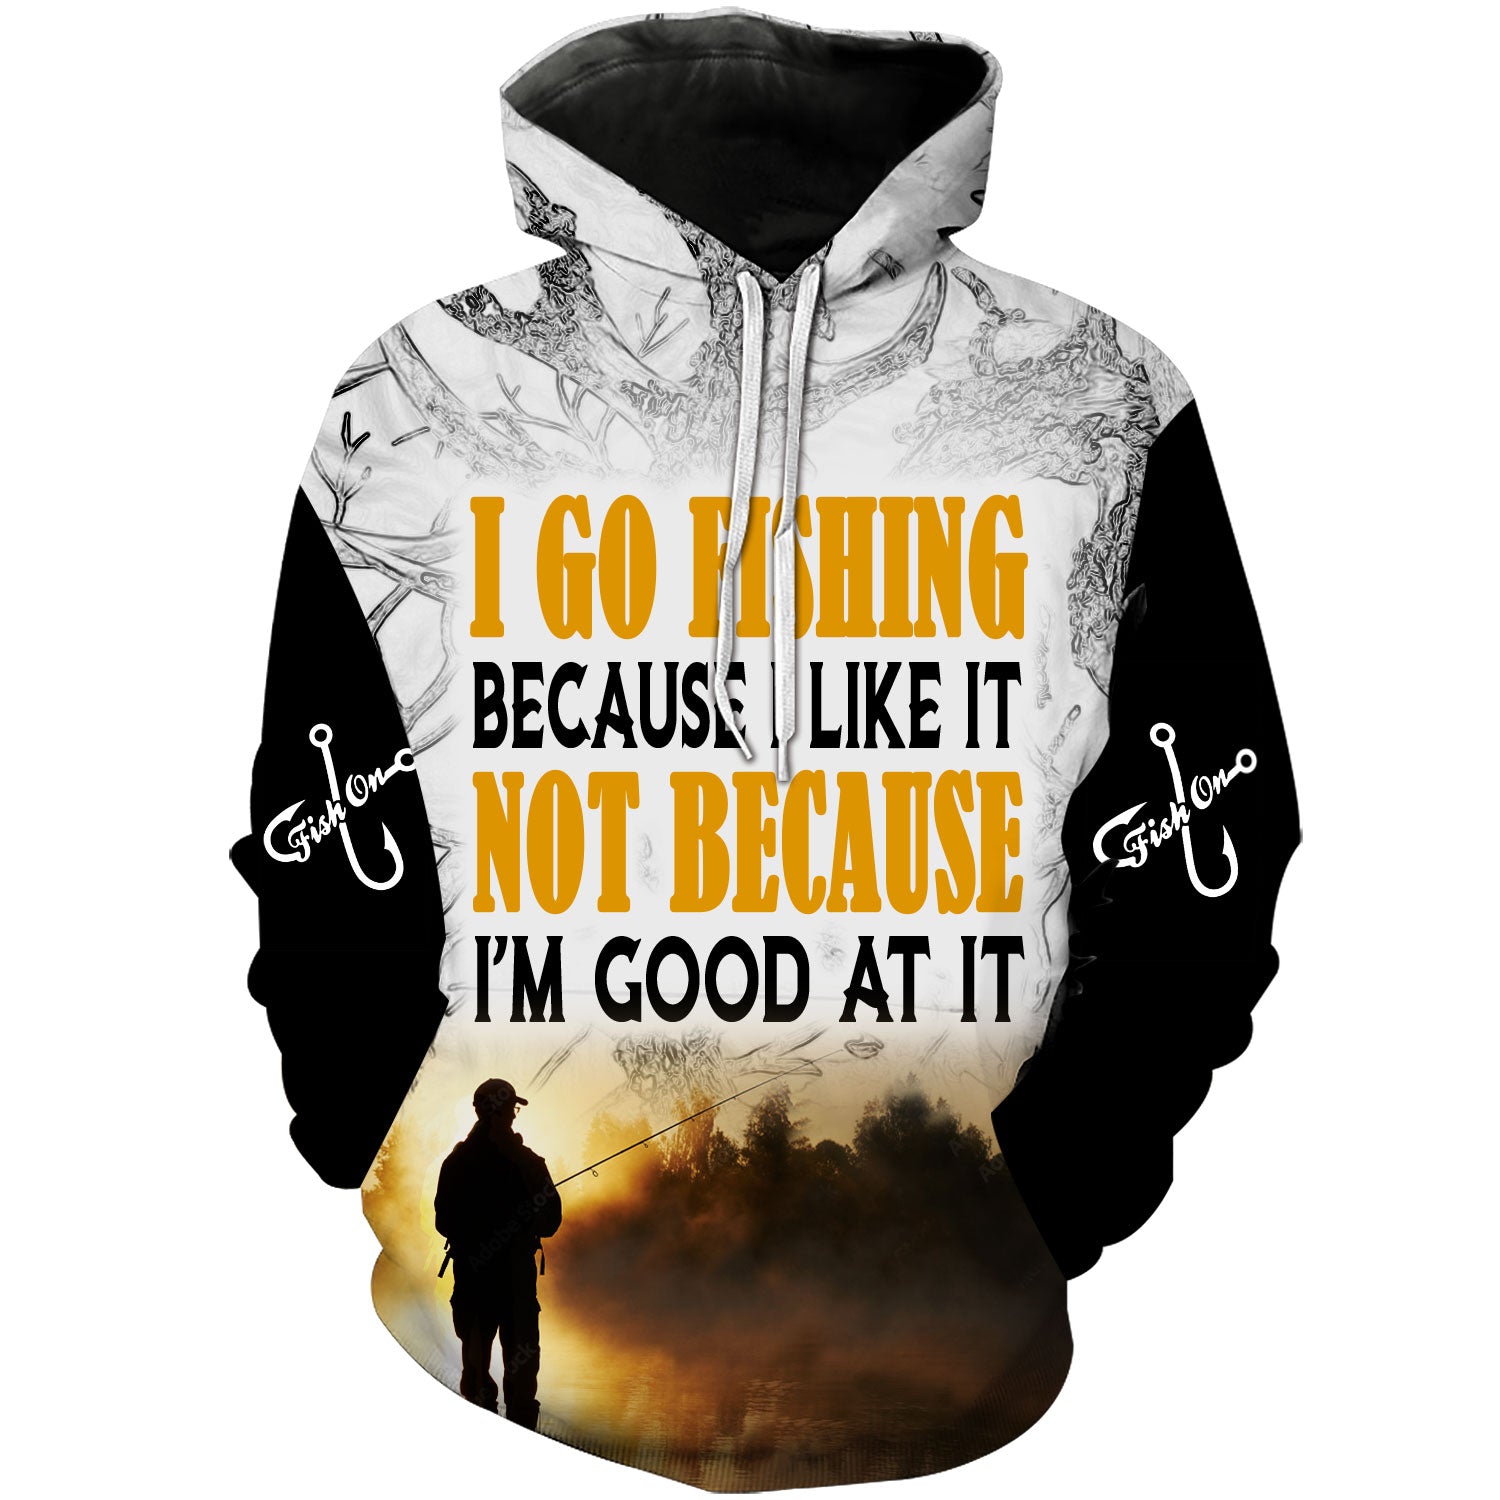 I go Fishing because I like it not because I'm good at it - Hoodie